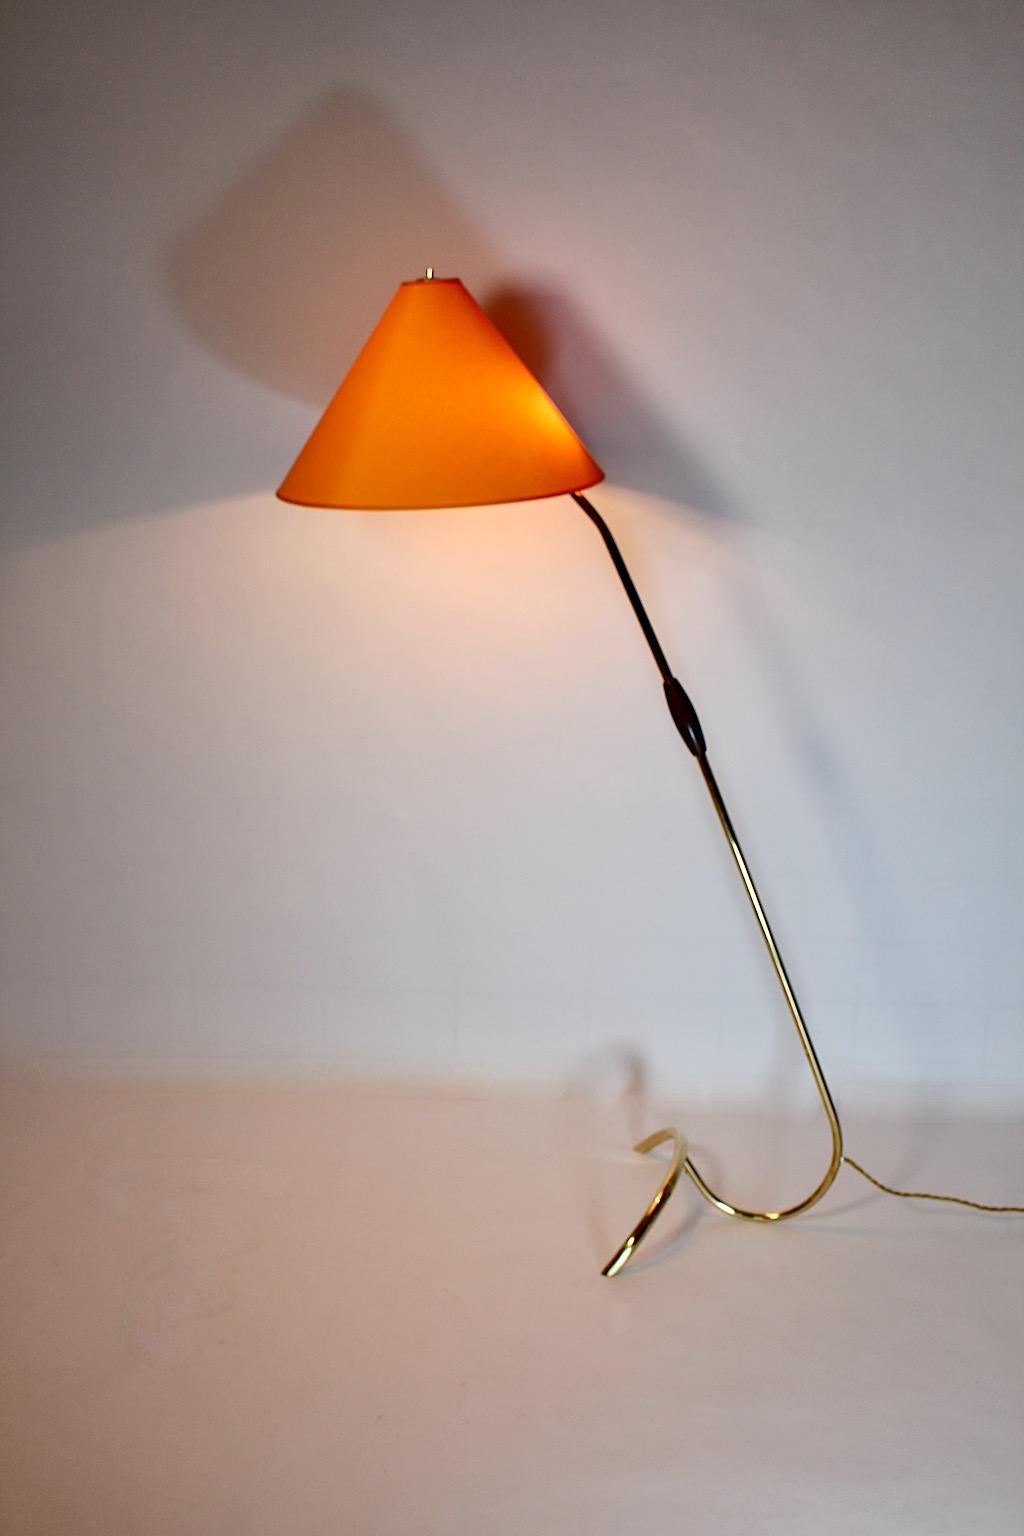 Mid-Century Modern vintage floor lamp by Rupert Nikoll from brass 1950s Vienna.
A gorgeous floor lamp from curved brass tube in iconic shape by Rupert Nikoll, 1950s Vienna.
This floor lamp based on a curved brass tube with a stem and a wooden